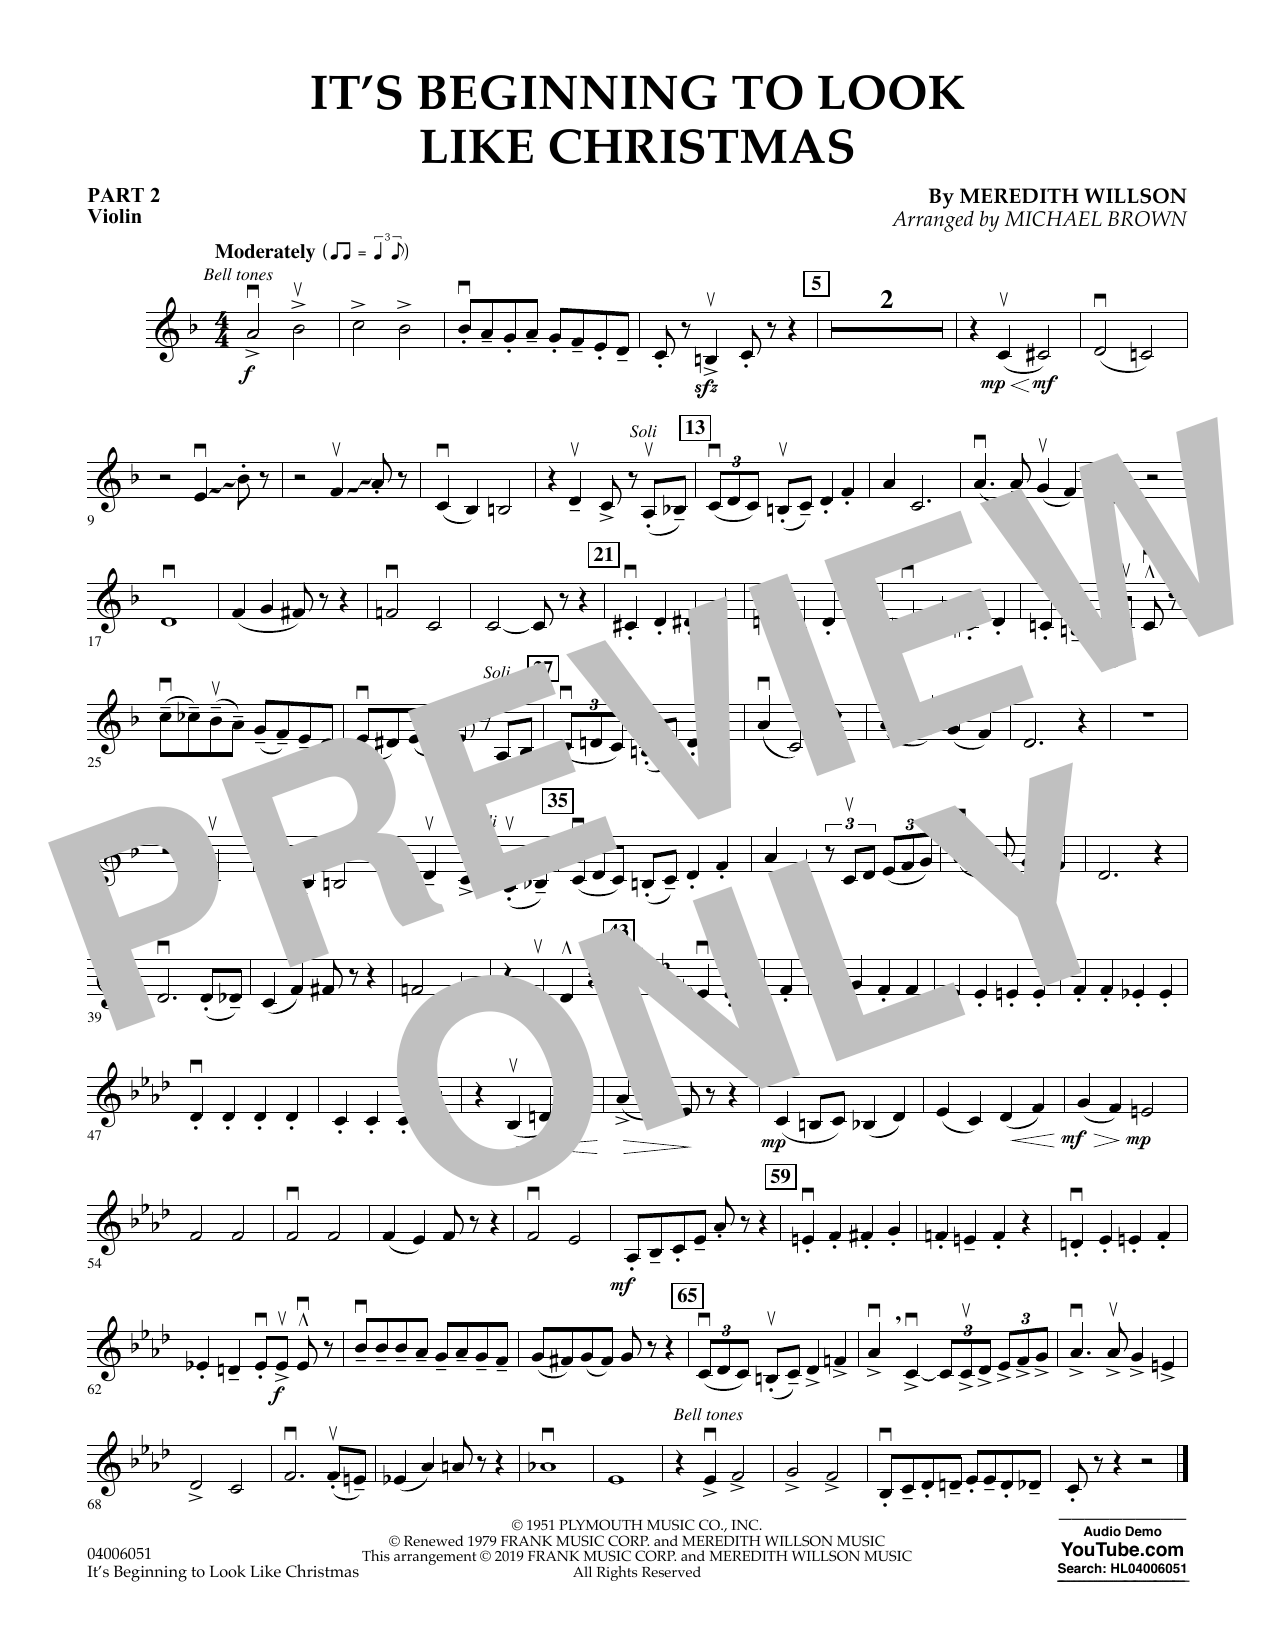 Meredith Willson It's Beginning to Look Like Christmas (arr. Michael Brown) - Pt.2 - Violin sheet music preview music notes and score for Concert Band including 1 page(s)